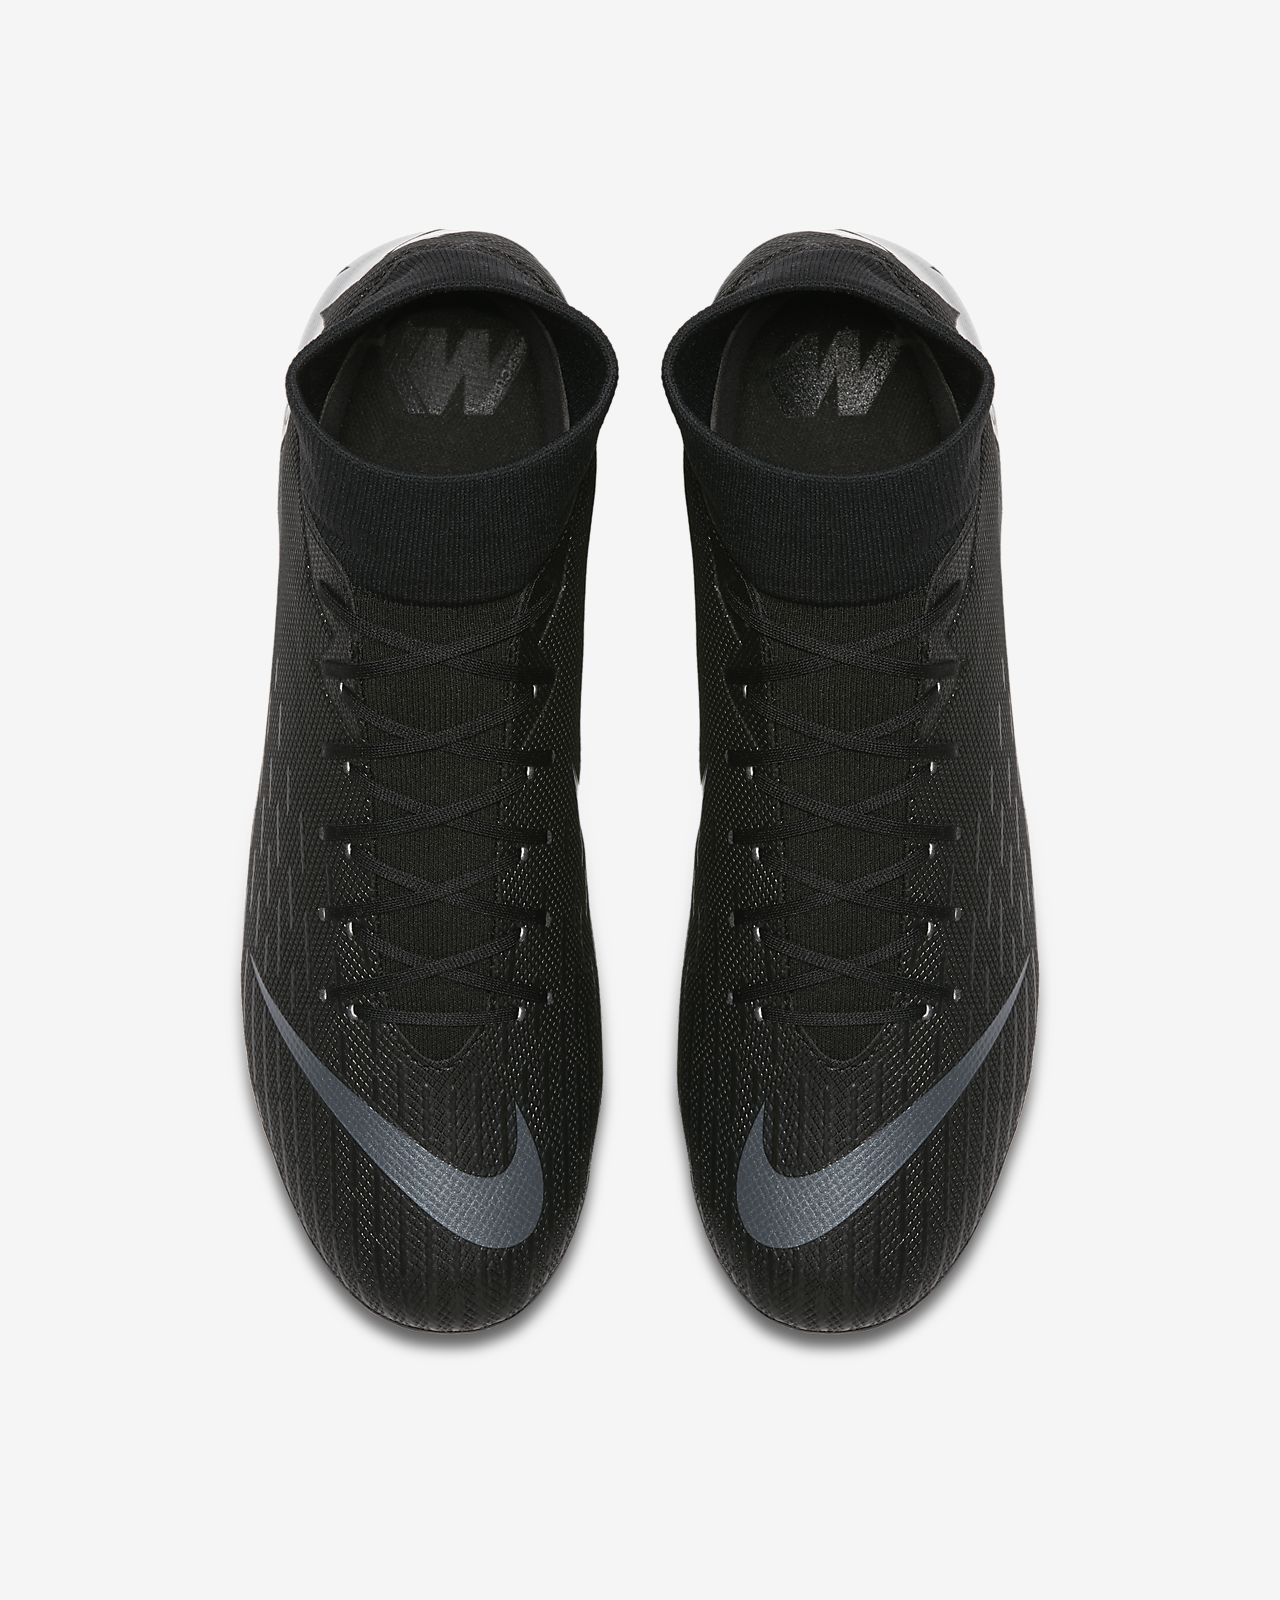 Nike Mercurial Superfly 6 Pro CR7 Chapter 7 Built on Dreams.